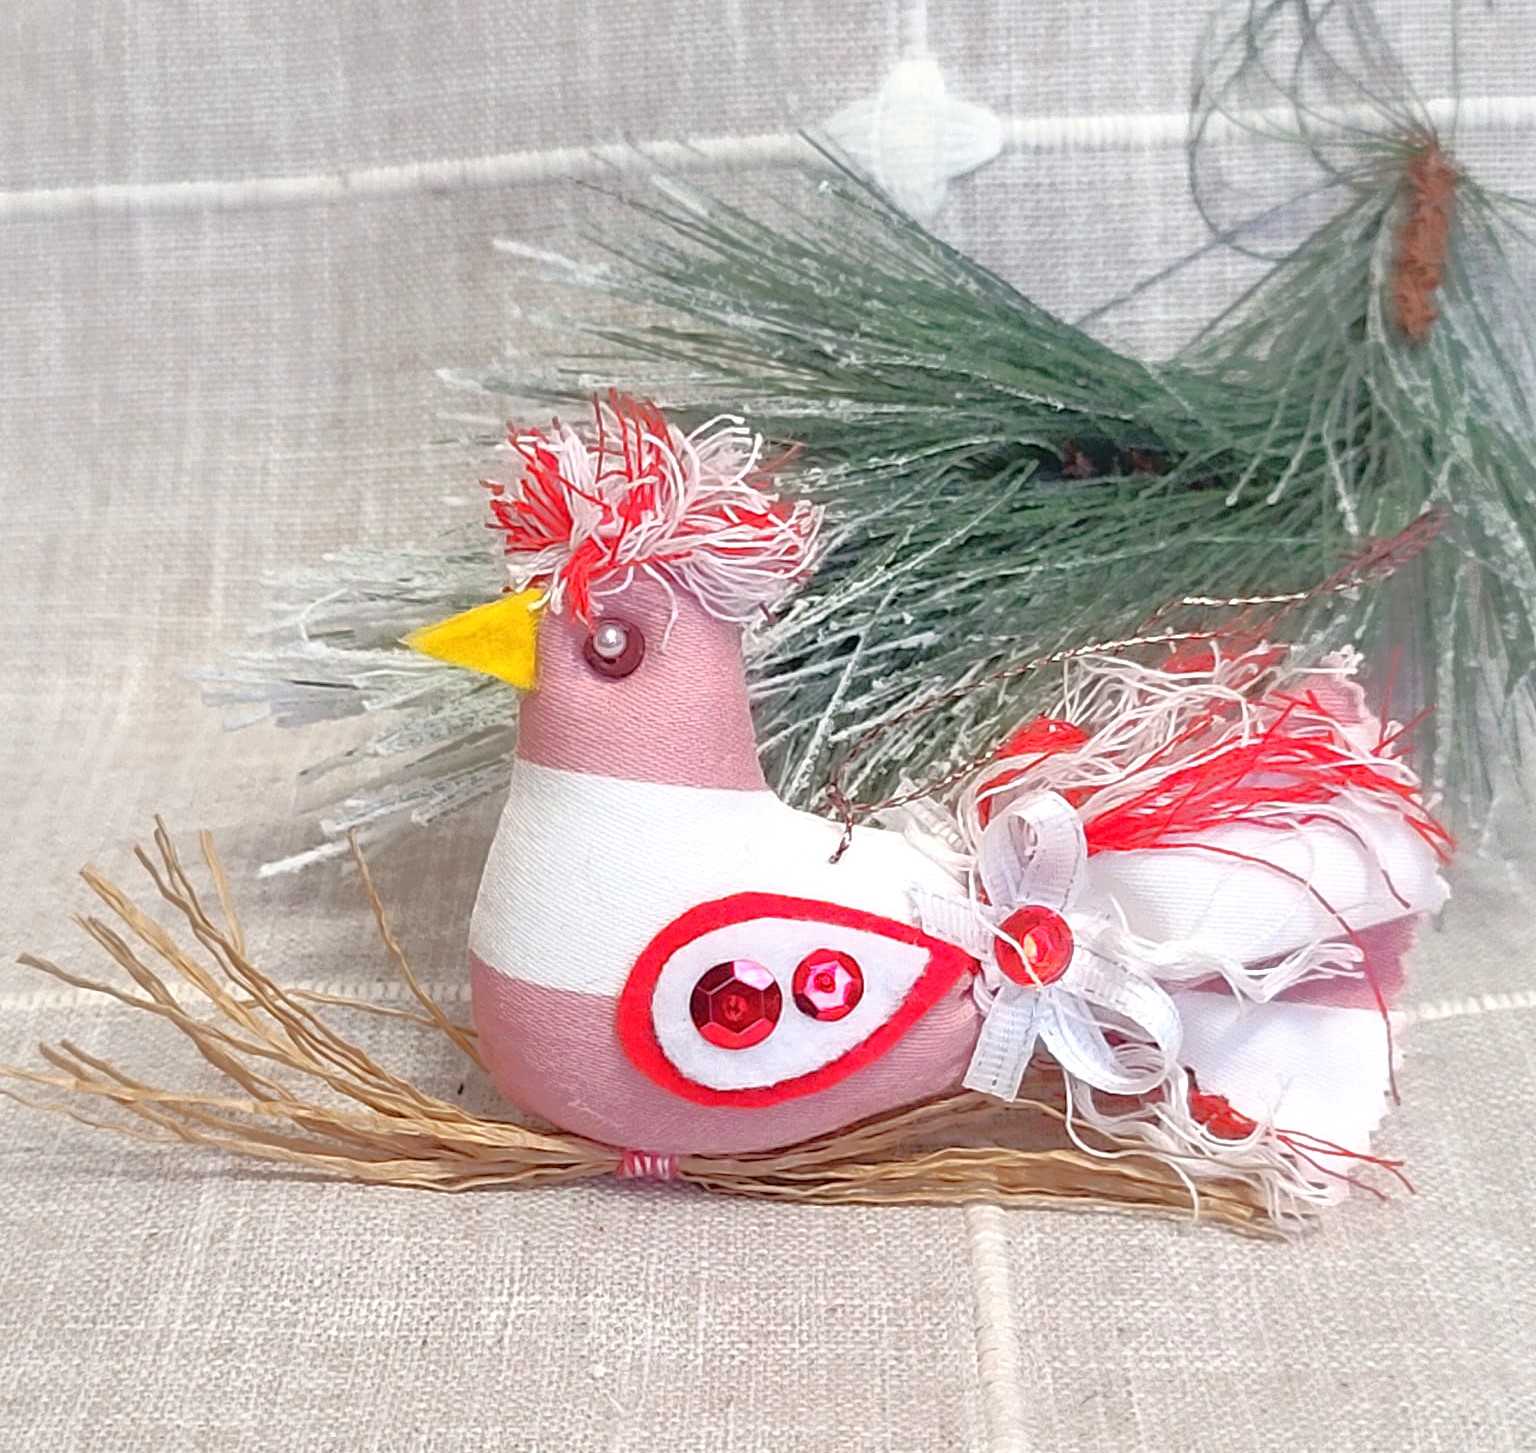 Whimsical felt bird on straw branch ornament - red and white